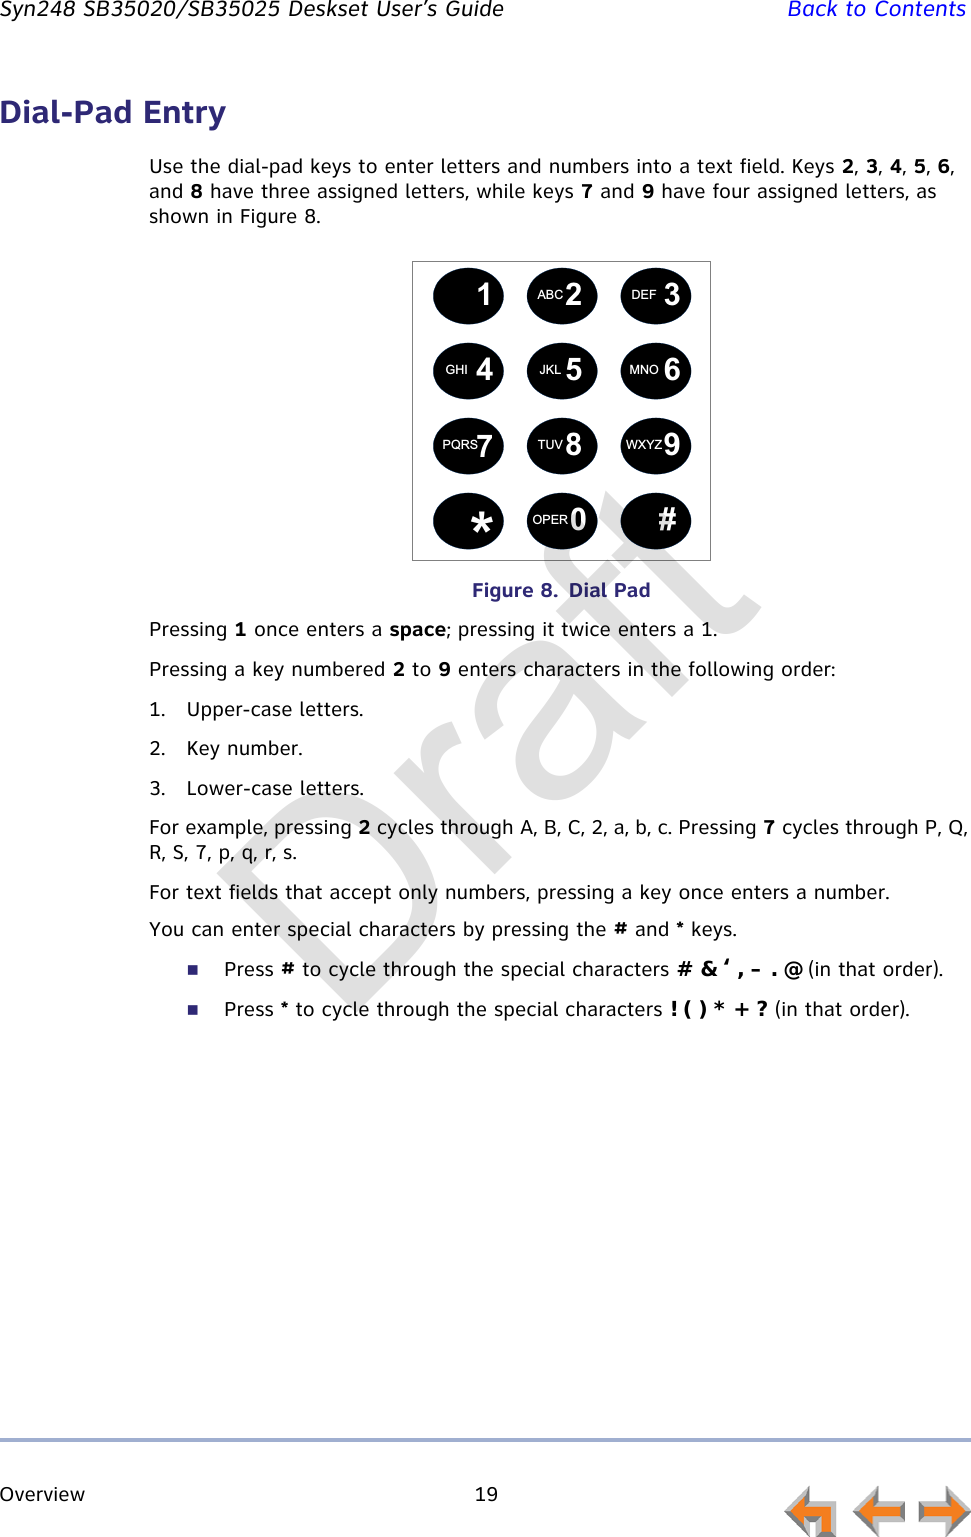 Overview 19         Syn248 SB35020/SB35025 Deskset User’s Guide Back to ContentsDial-Pad EntryUse the dial-pad keys to enter letters and numbers into a text field. Keys 2, 3, 4, 5, 6, and 8 have three assigned letters, while keys 7 and 9 have four assigned letters, as shown in Figure 8.Figure 8.  Dial PadPressing 1 once enters a space; pressing it twice enters a 1.Pressing a key numbered 2 to 9 enters characters in the following order:1. Upper-case letters.2. Key number.3. Lower-case letters.For example, pressing 2 cycles through A, B, C, 2, a, b, c. Pressing 7 cycles through P, Q, R, S, 7, p, q, r, s.For text fields that accept only numbers, pressing a key once enters a number.You can enter special characters by pressing the # and * keys.Press # to cycle through the special characters # &amp; ‘ , – . @ (in that order).Press * to cycle through the special characters ! ( ) * + ? (in that order).12 345 67890ABC DEFGHI JKL MNOPQRS TUV WXYZOPER#*Draft